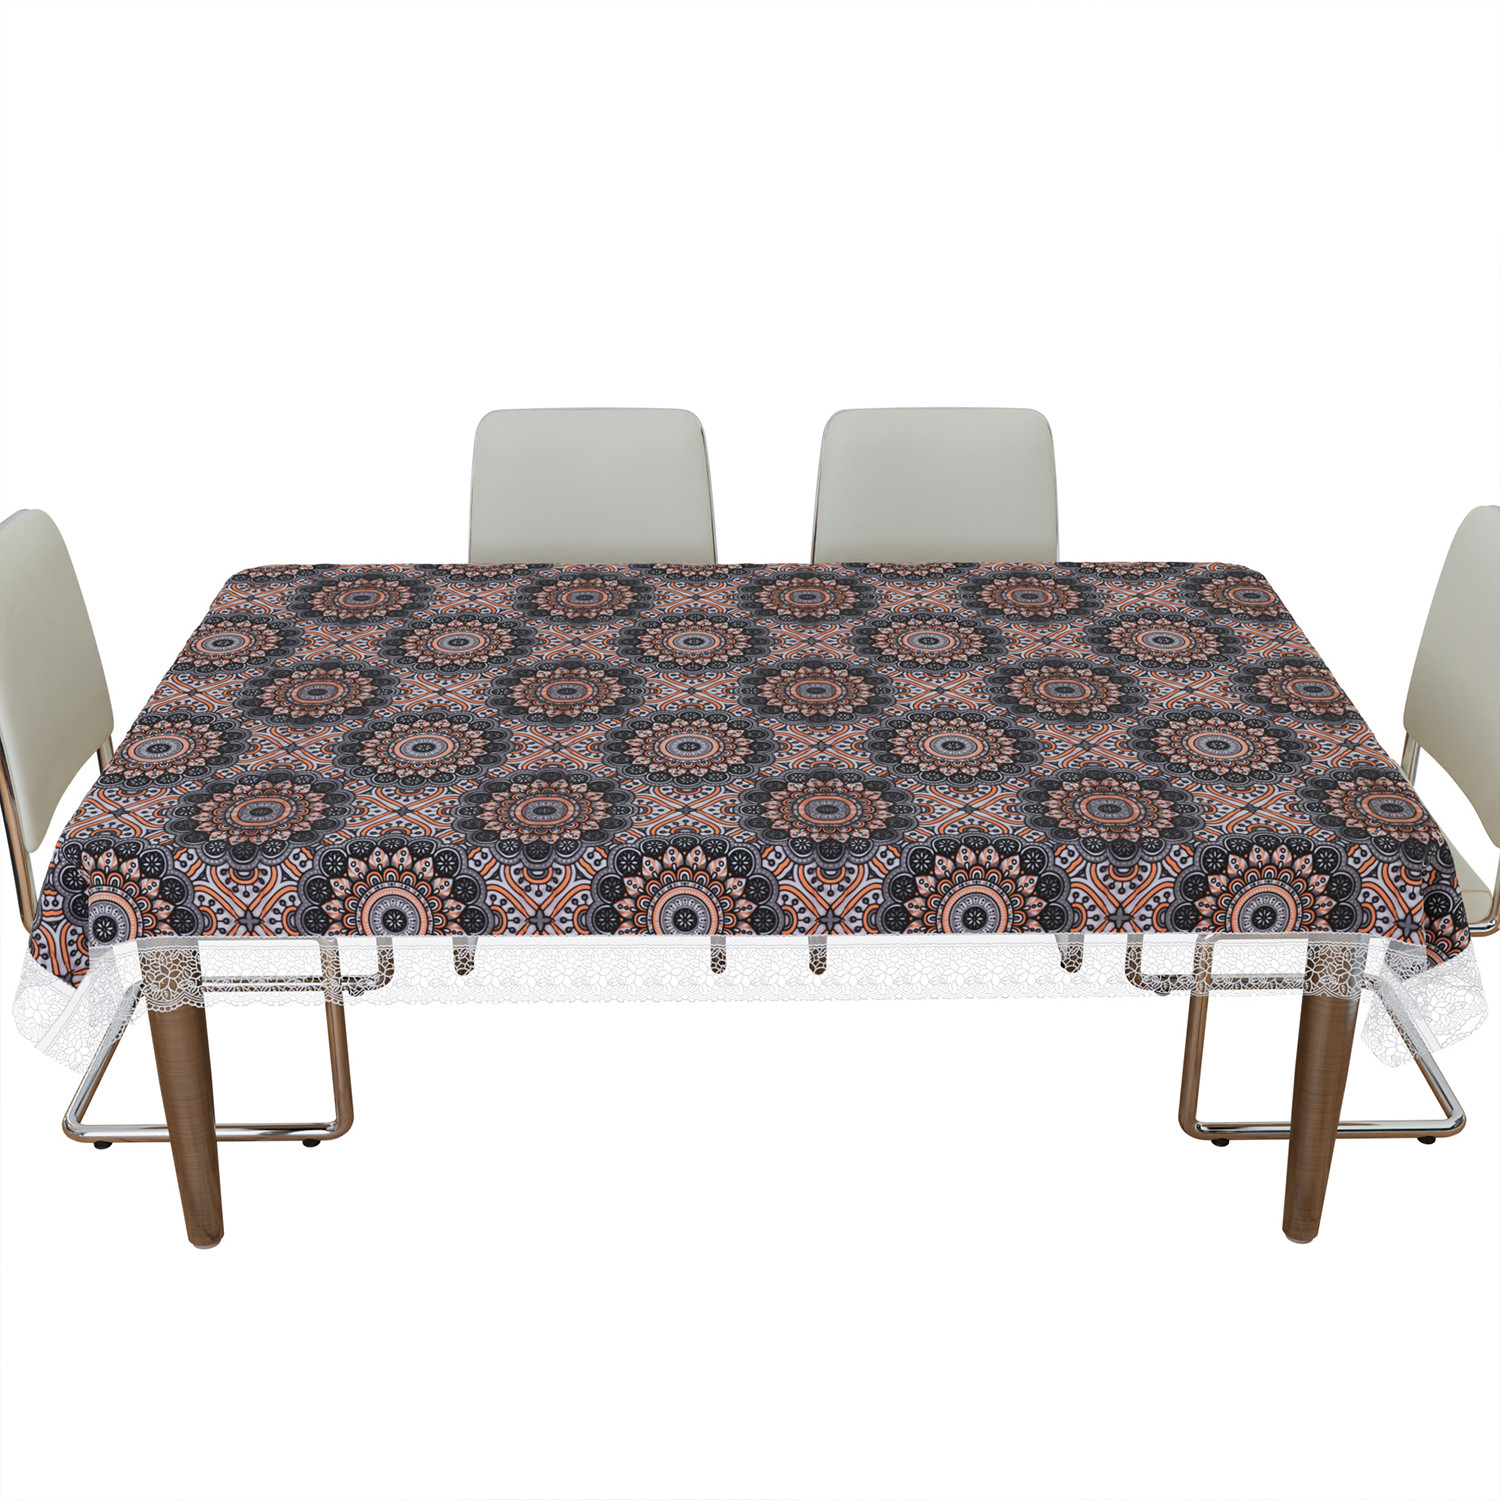 Kuber Industries Dining Table Cover | PVC Table Cloth Cover | 6 Seater Table Cloth | Rangoli Table Cover | Table Protector | Table Cover for Dining Table | 60x90 Inch | DTC | Black